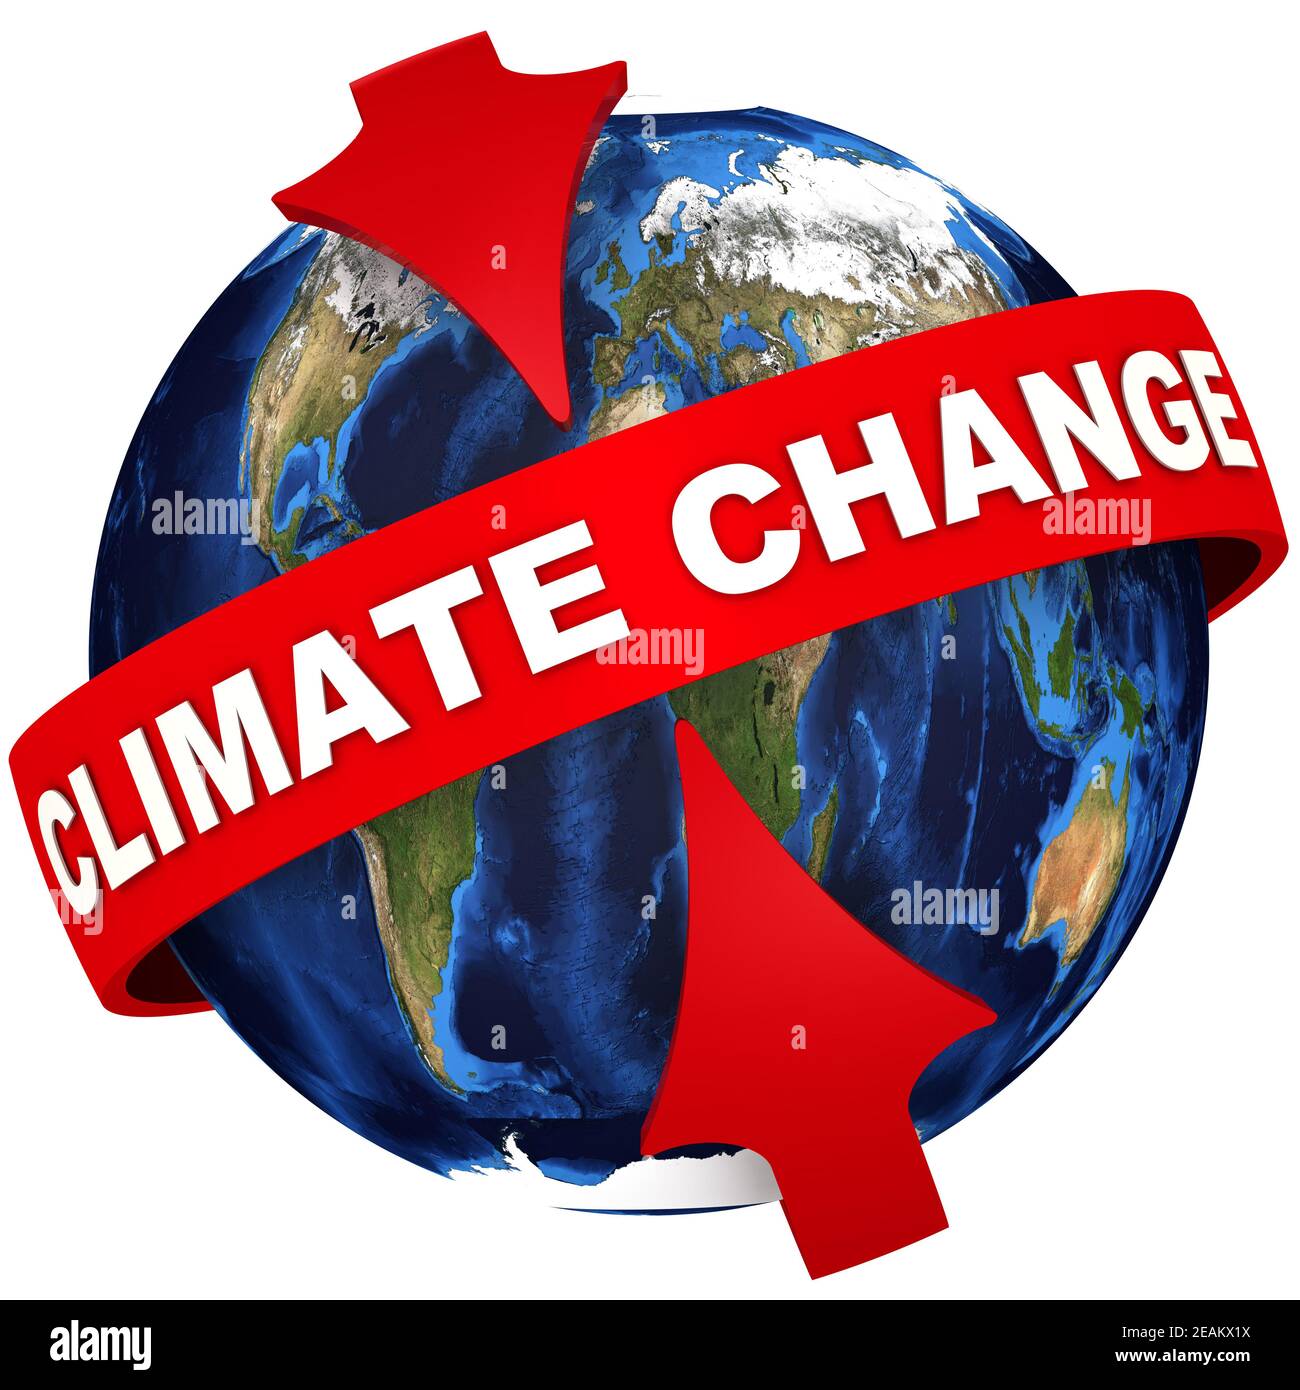 Global climate change. Red arrows point to the white text GLOBAL CLIMATE CHANGE on the red tape on the background of the Globe. Isolated Stock Photo